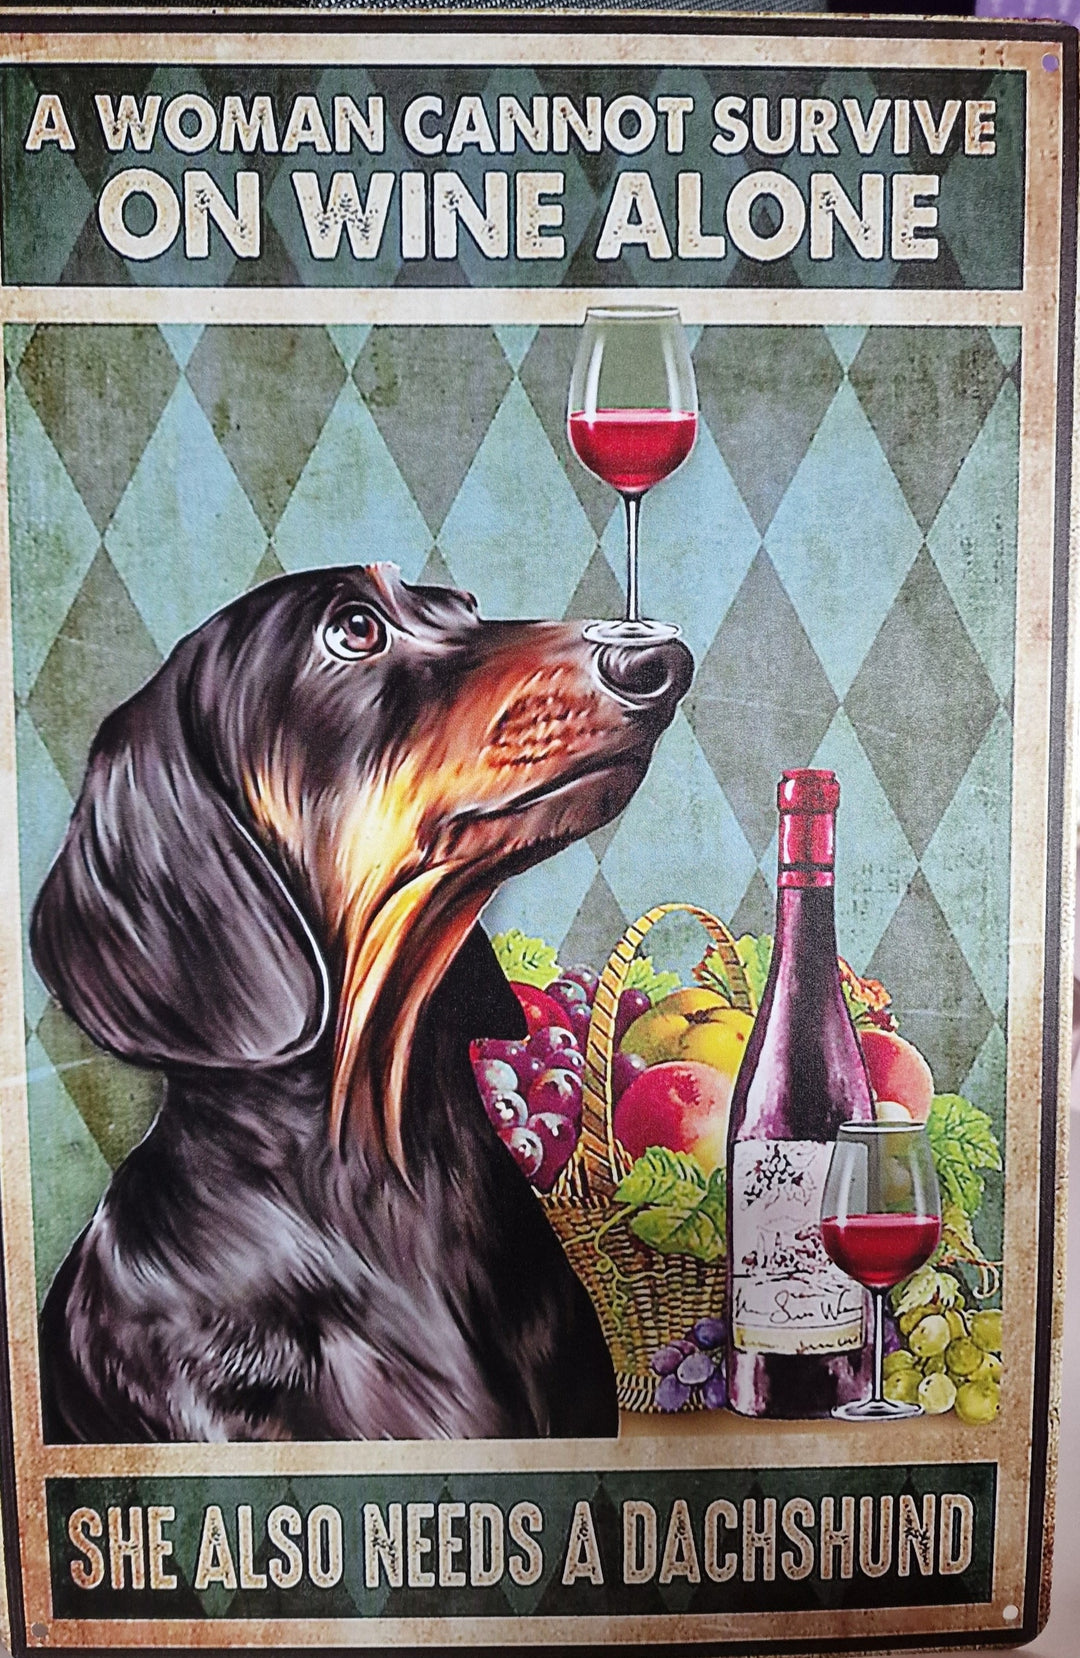 " A woman cannot survive on wine alone-she also needs a Dachshund"